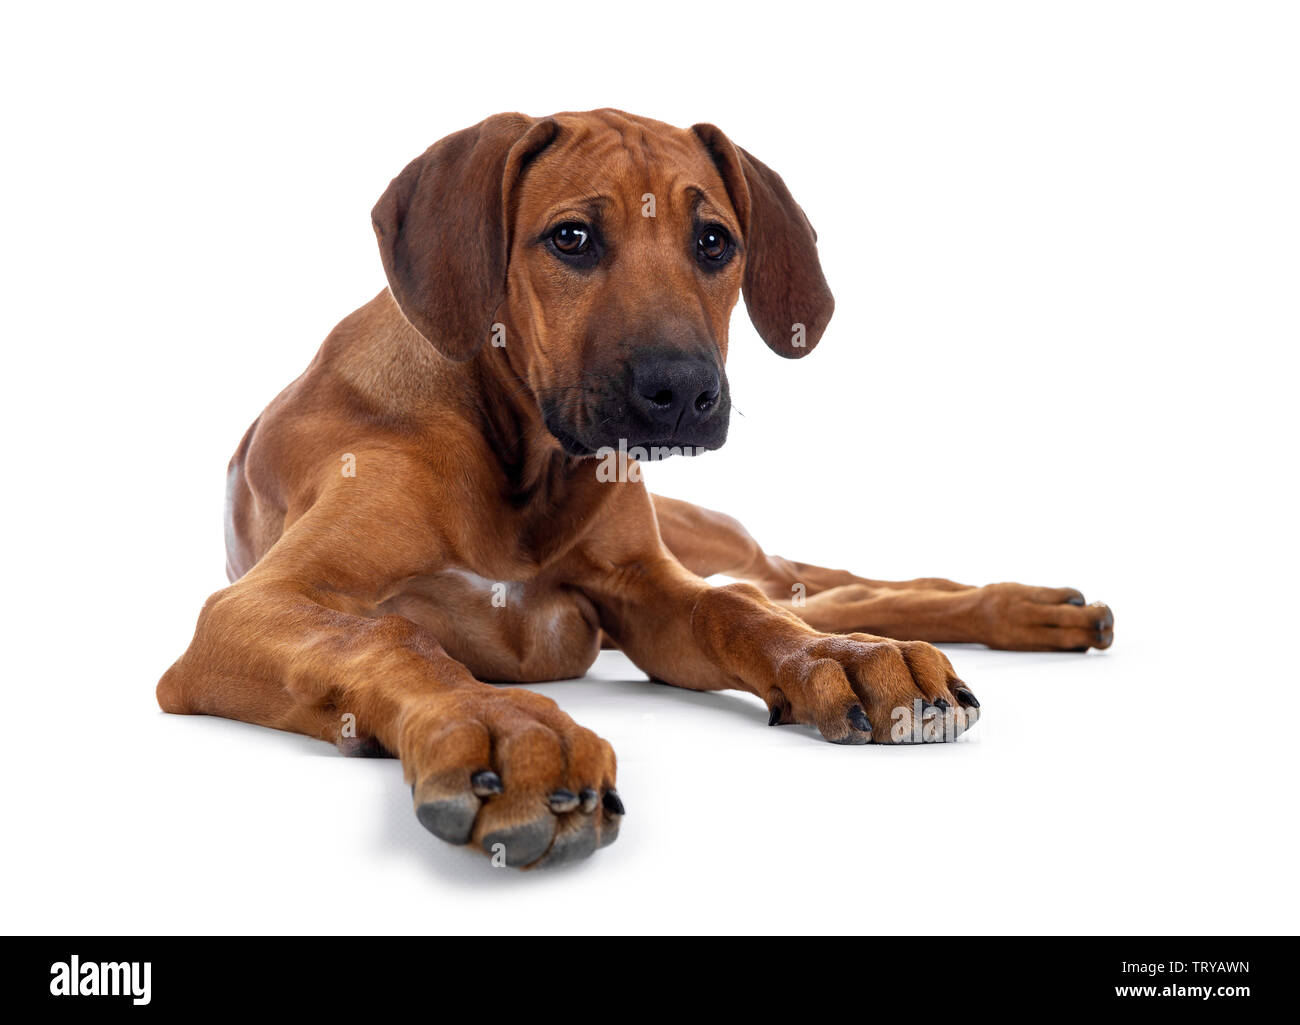 Cute wheaten Rhodesian Ridgeback puppy dog with dark muzzle, laying down facing front. Looking at camera with sweet brown eyes. Isolated on white back Stock Photo